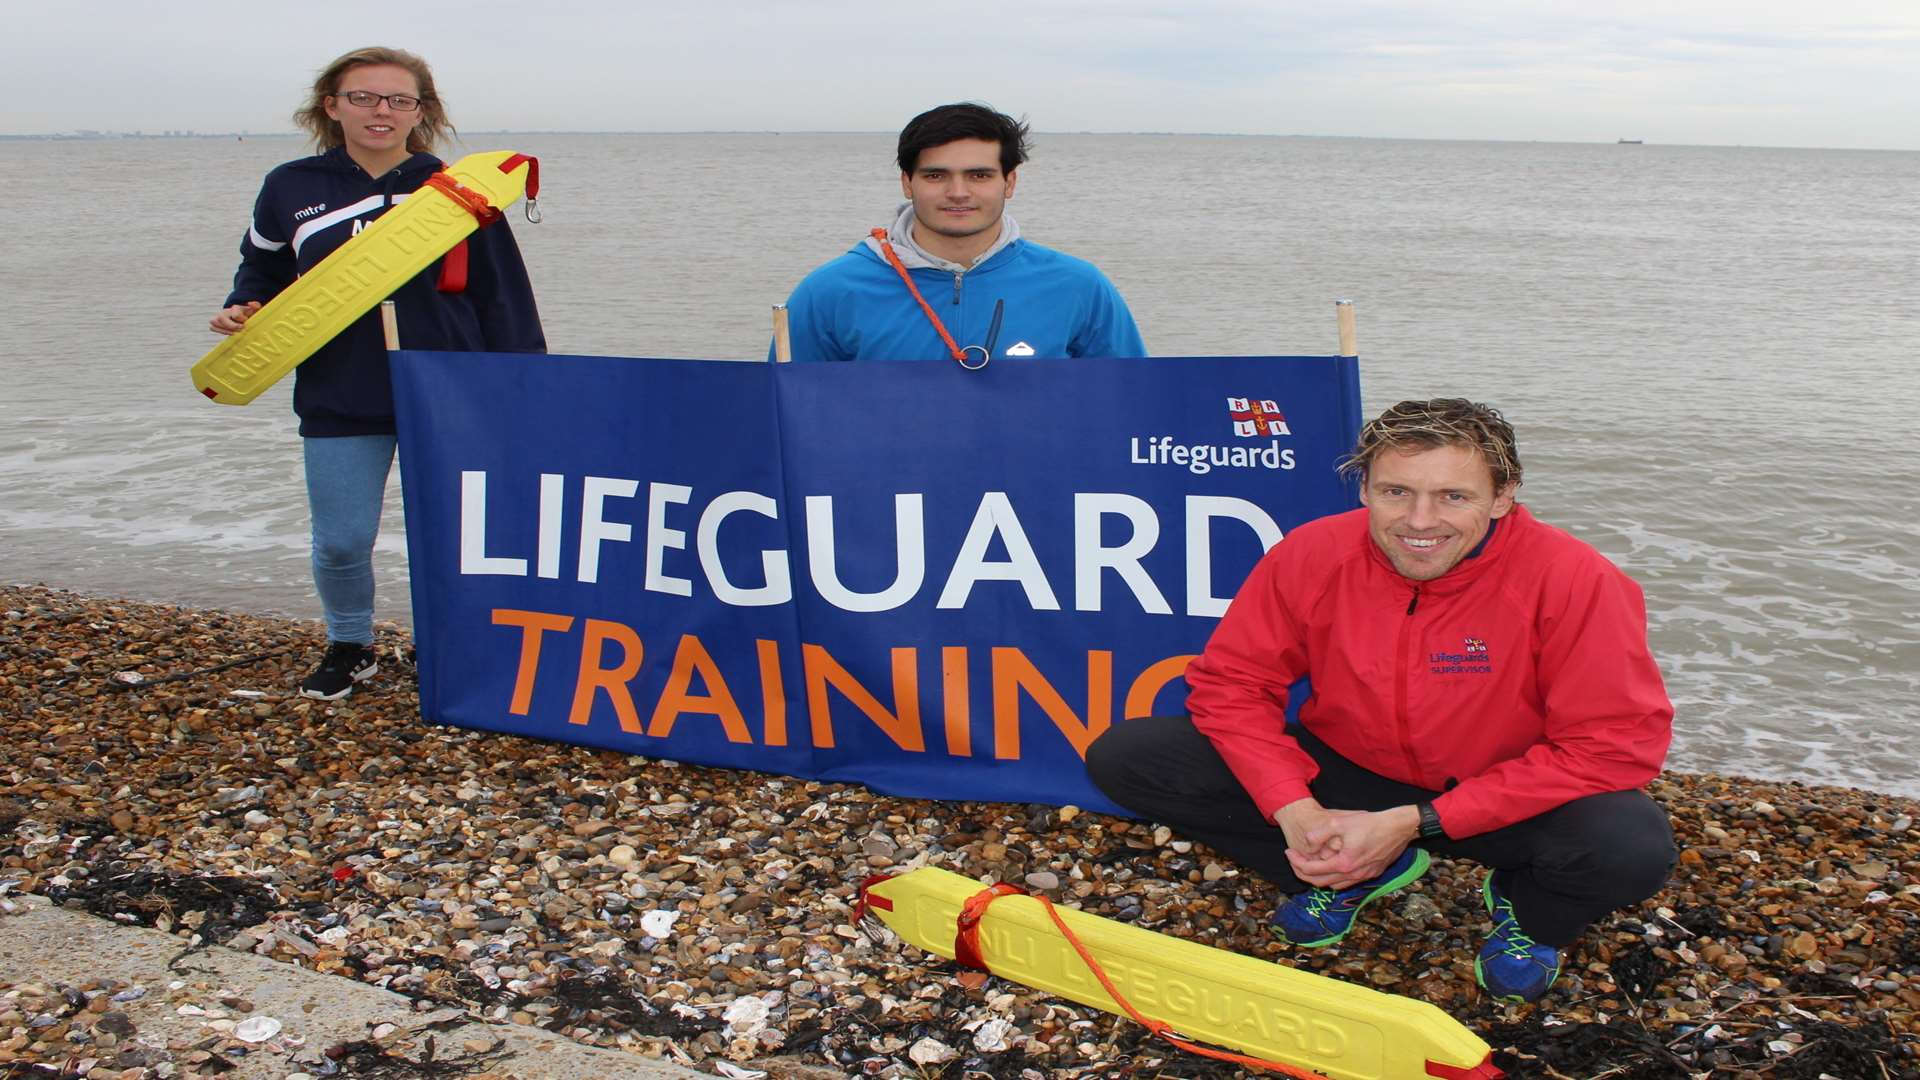 Lifeguard training on Sheerness beach with Supervisor Tom Thorndycraft, right, and trainees Daniel Bonthuys and Madison North